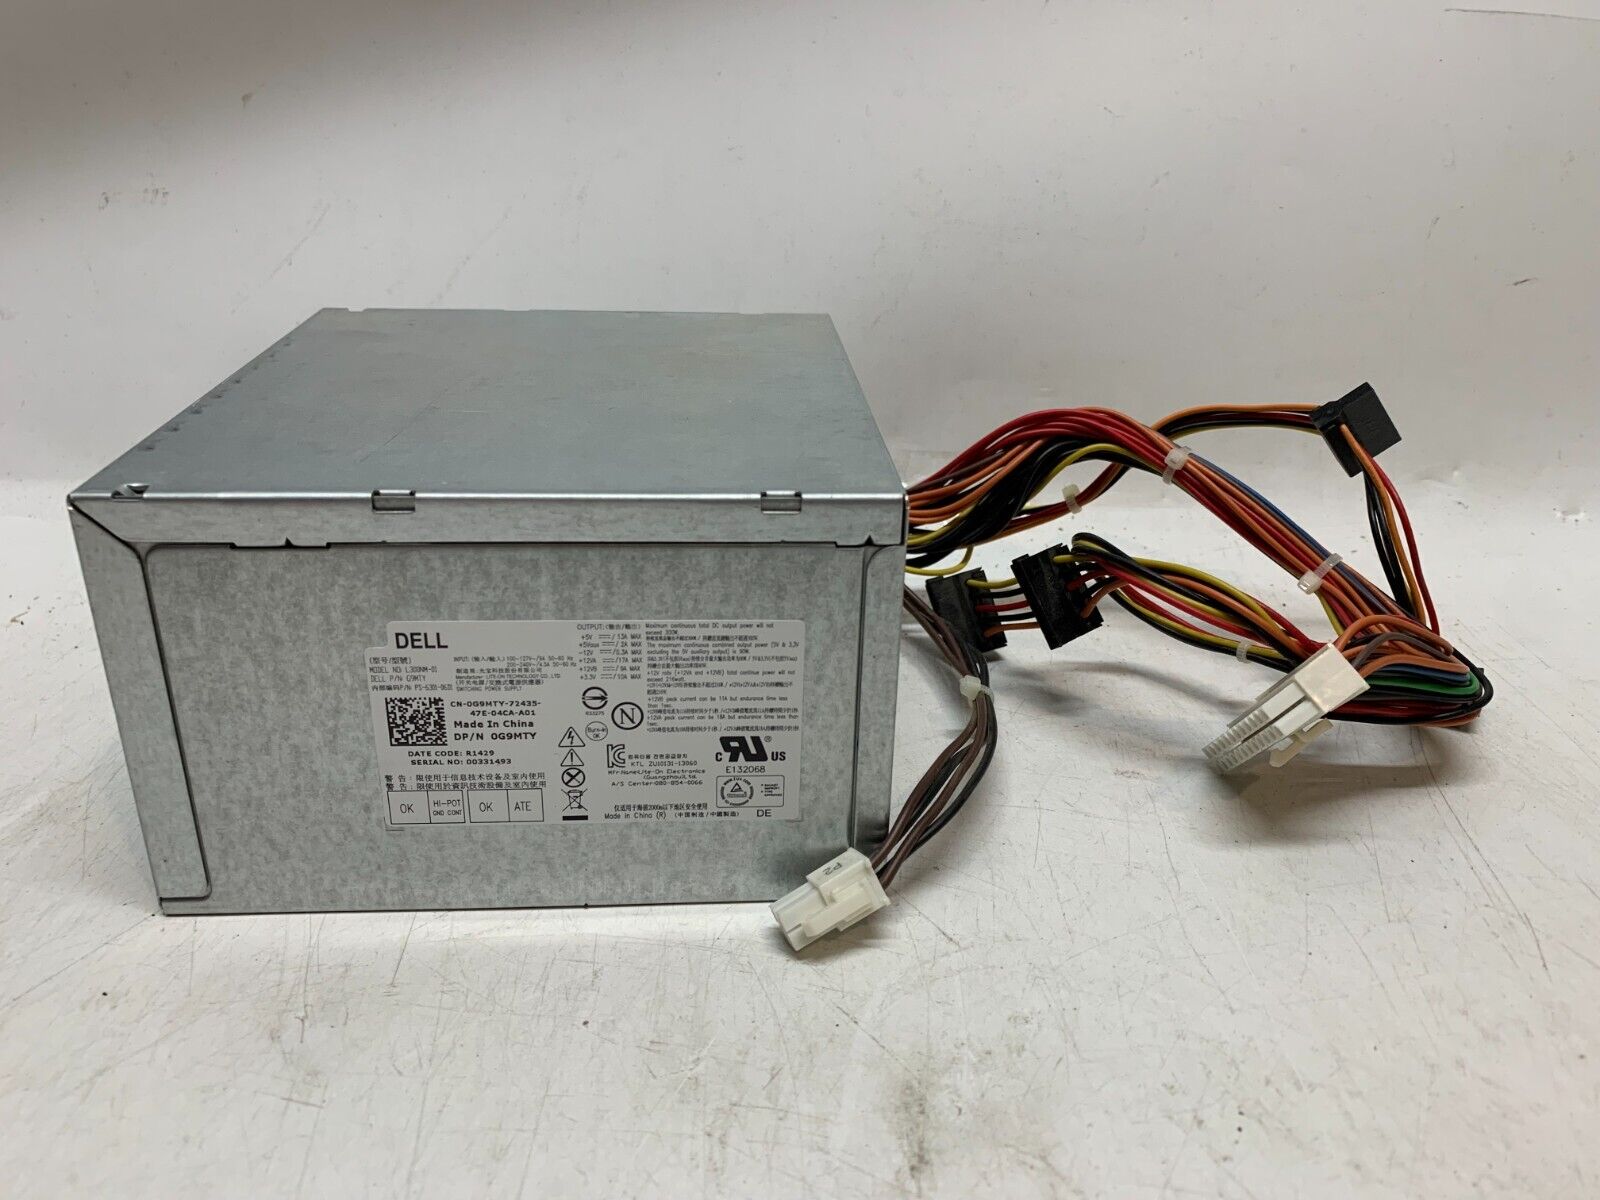 Dell Lite-On L300NM-01 PS-6301-06D1 300W Power Supply ATX G9MTY